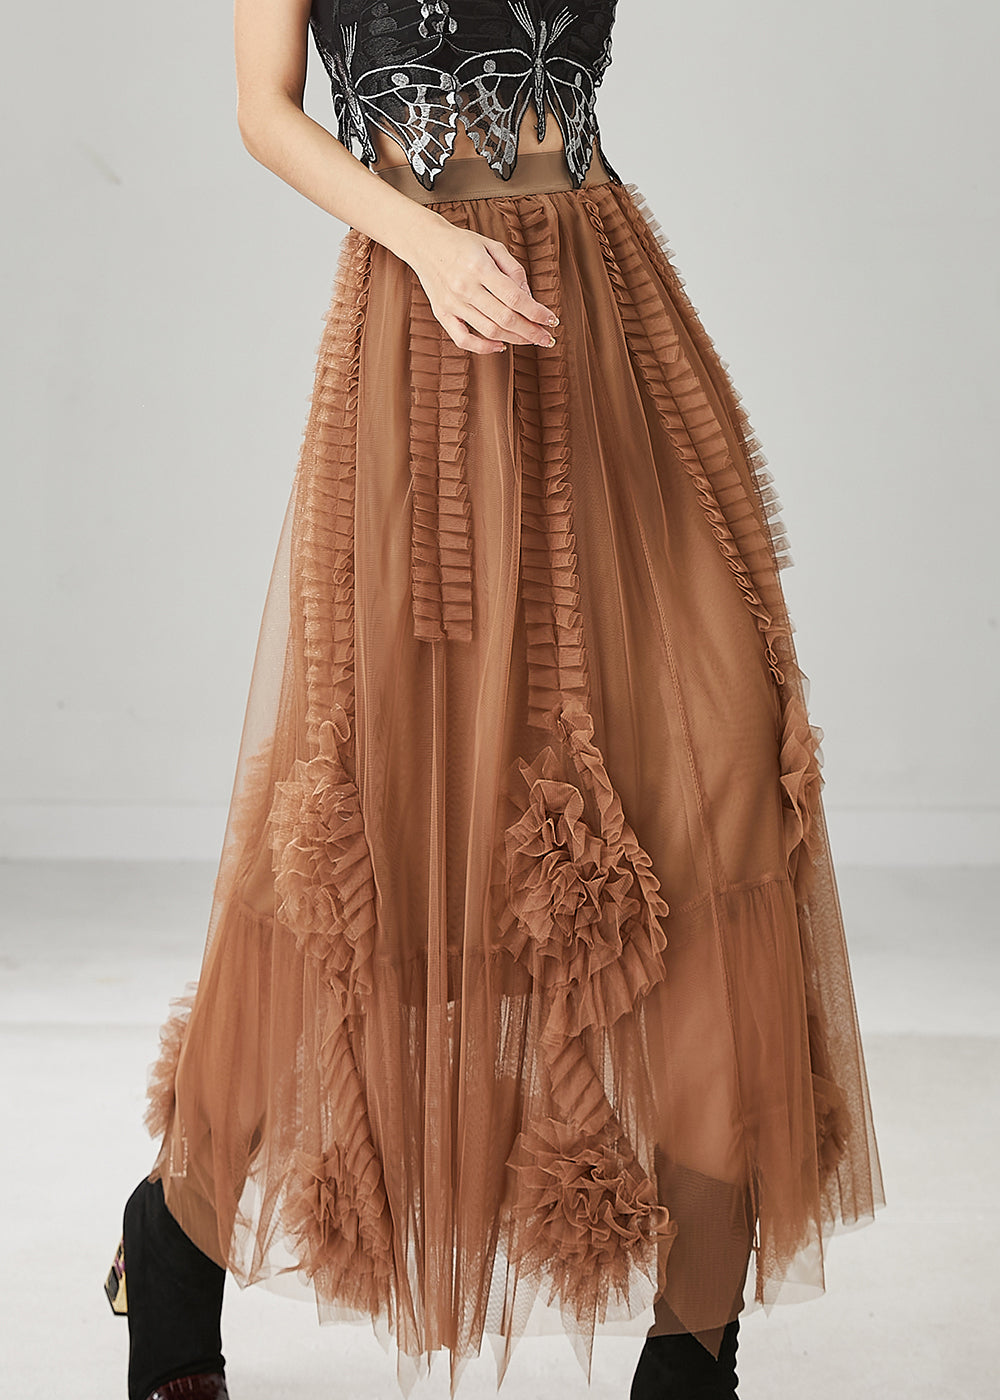 Classy Brown Ruffled Stereoscopic Floral Tulle Skirt Spring YU1063